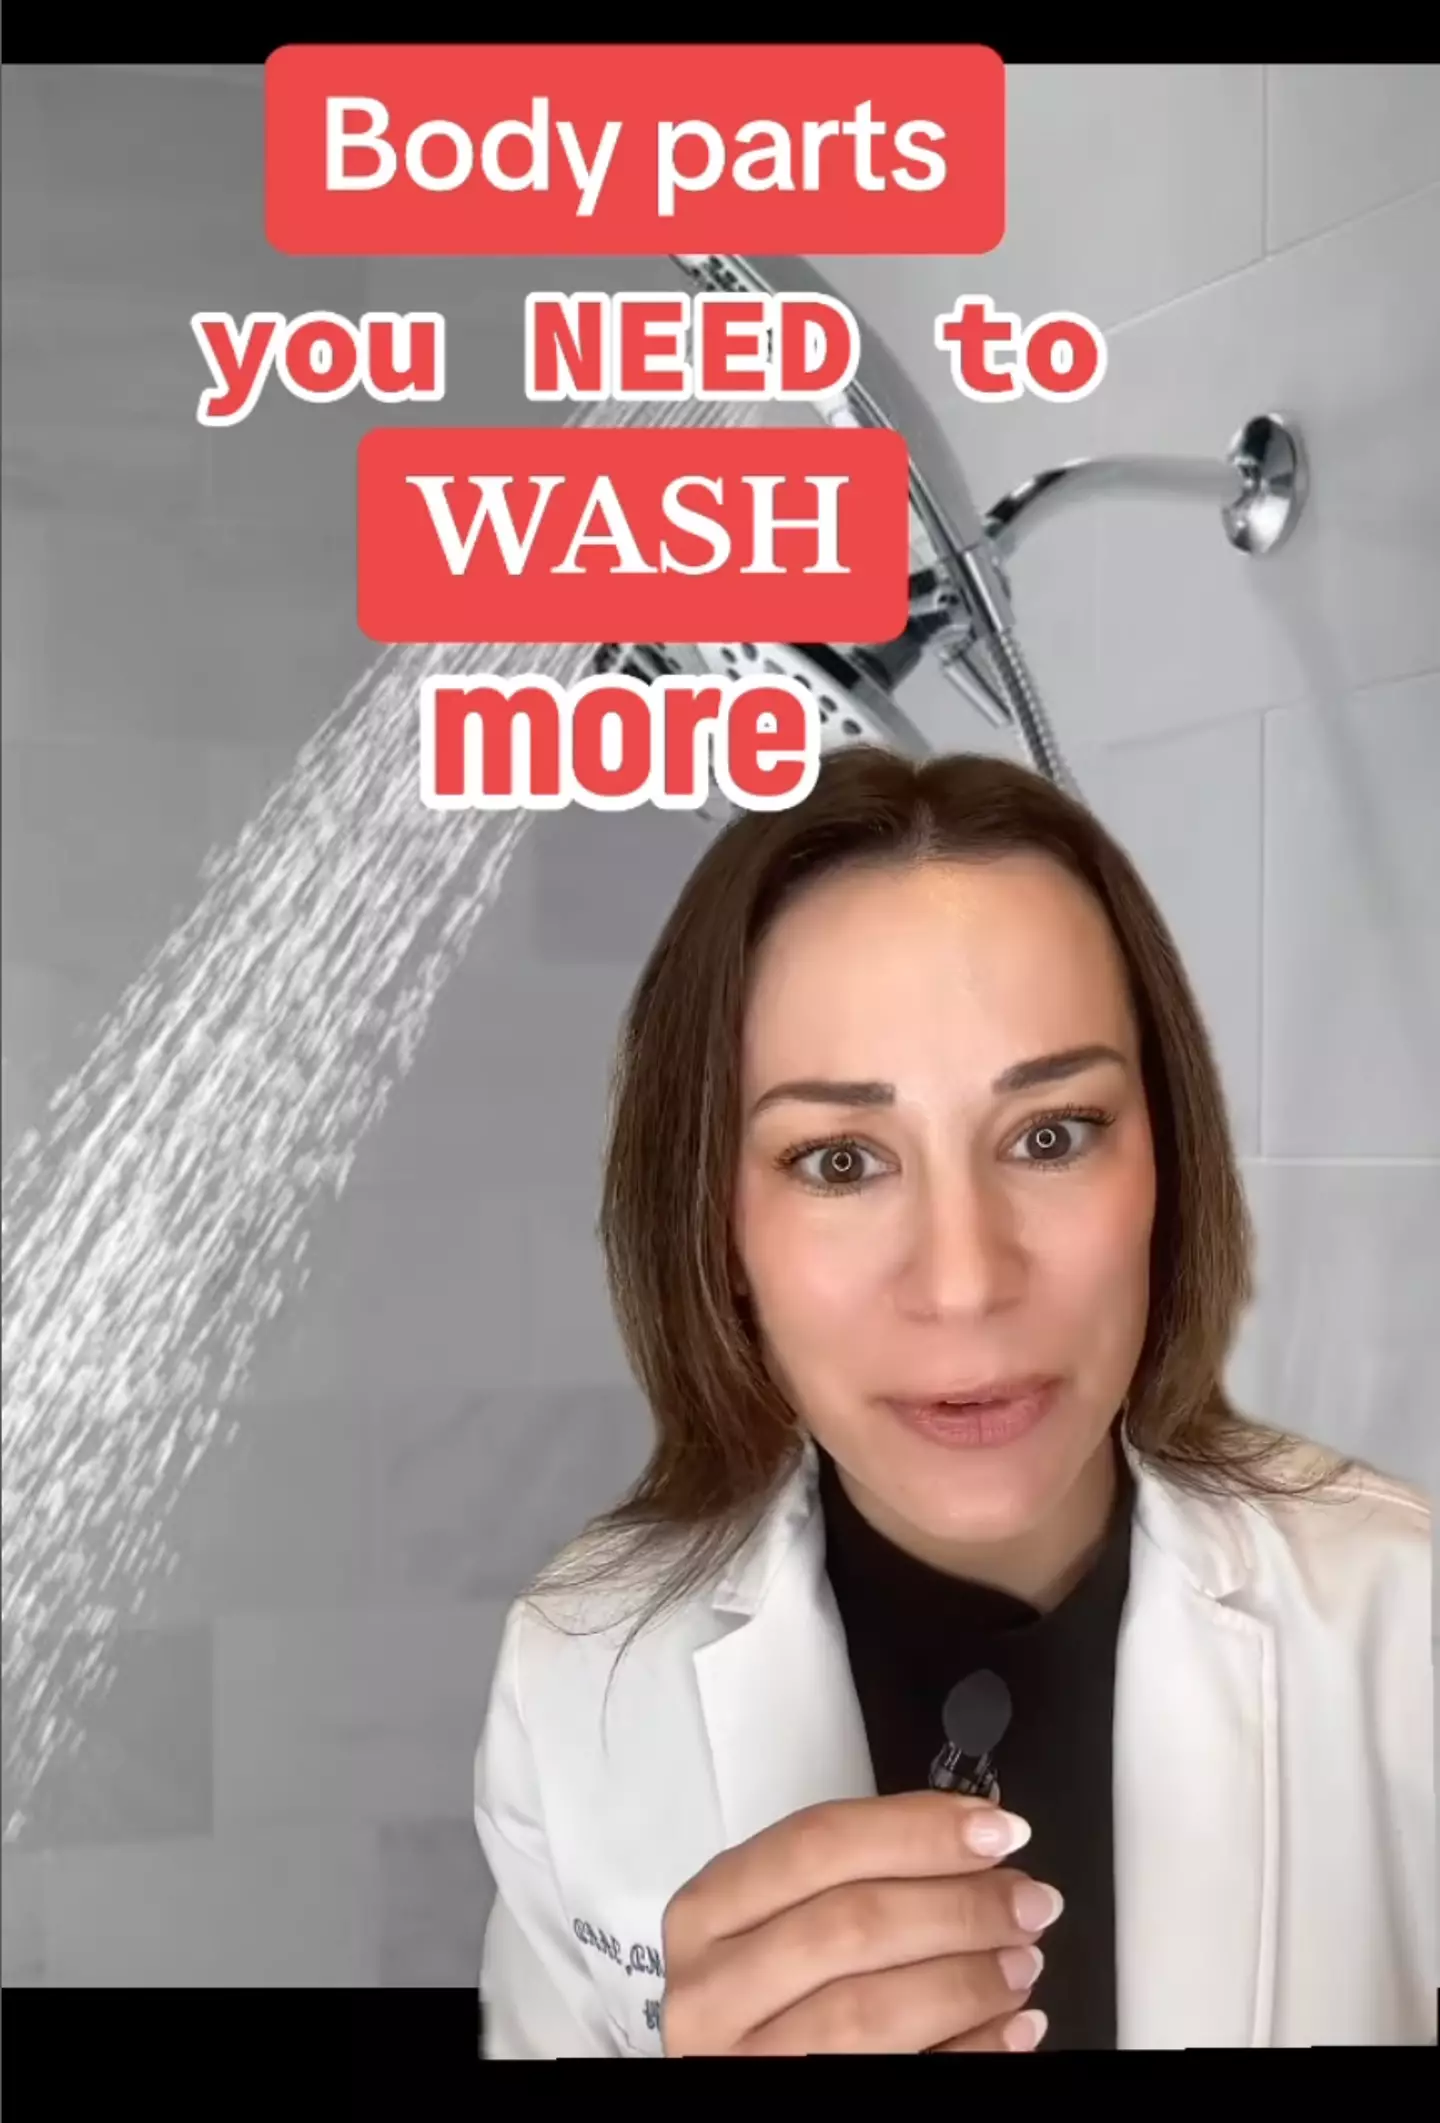 A dermatologist has shared the 3 places you need to make sure you're washing.